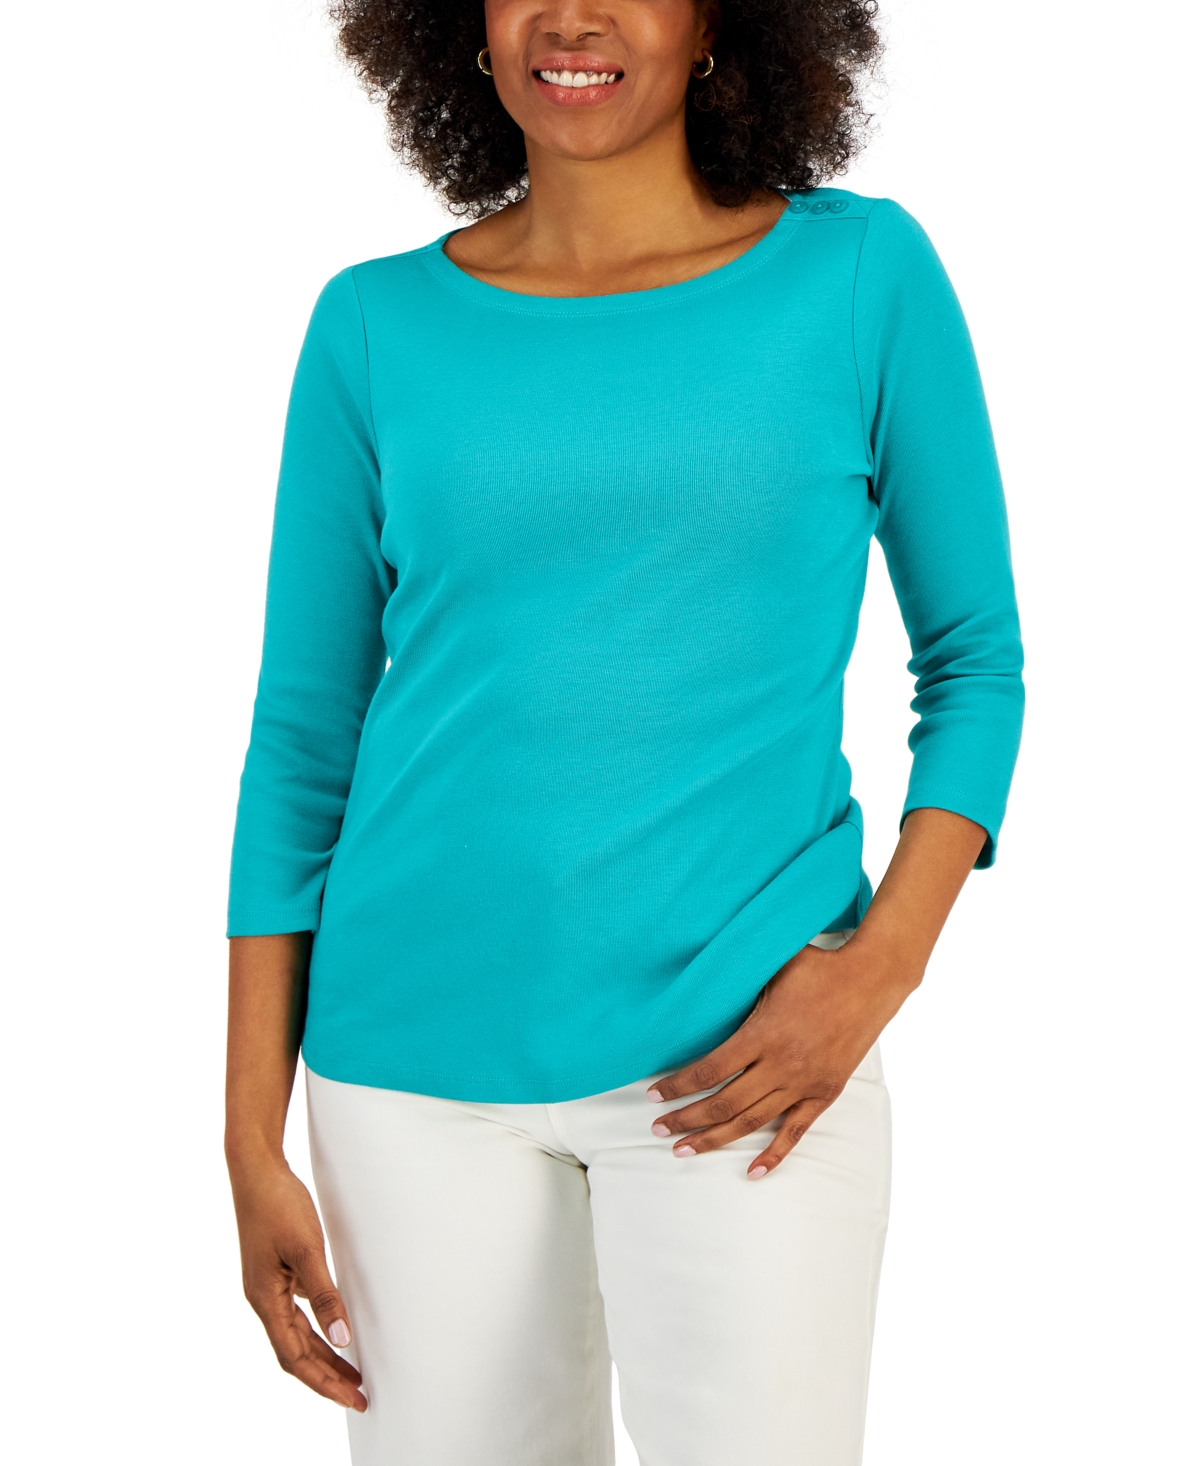 Charter Club Women's Pima Cotton Boat-Neck Top, Created for Macy's